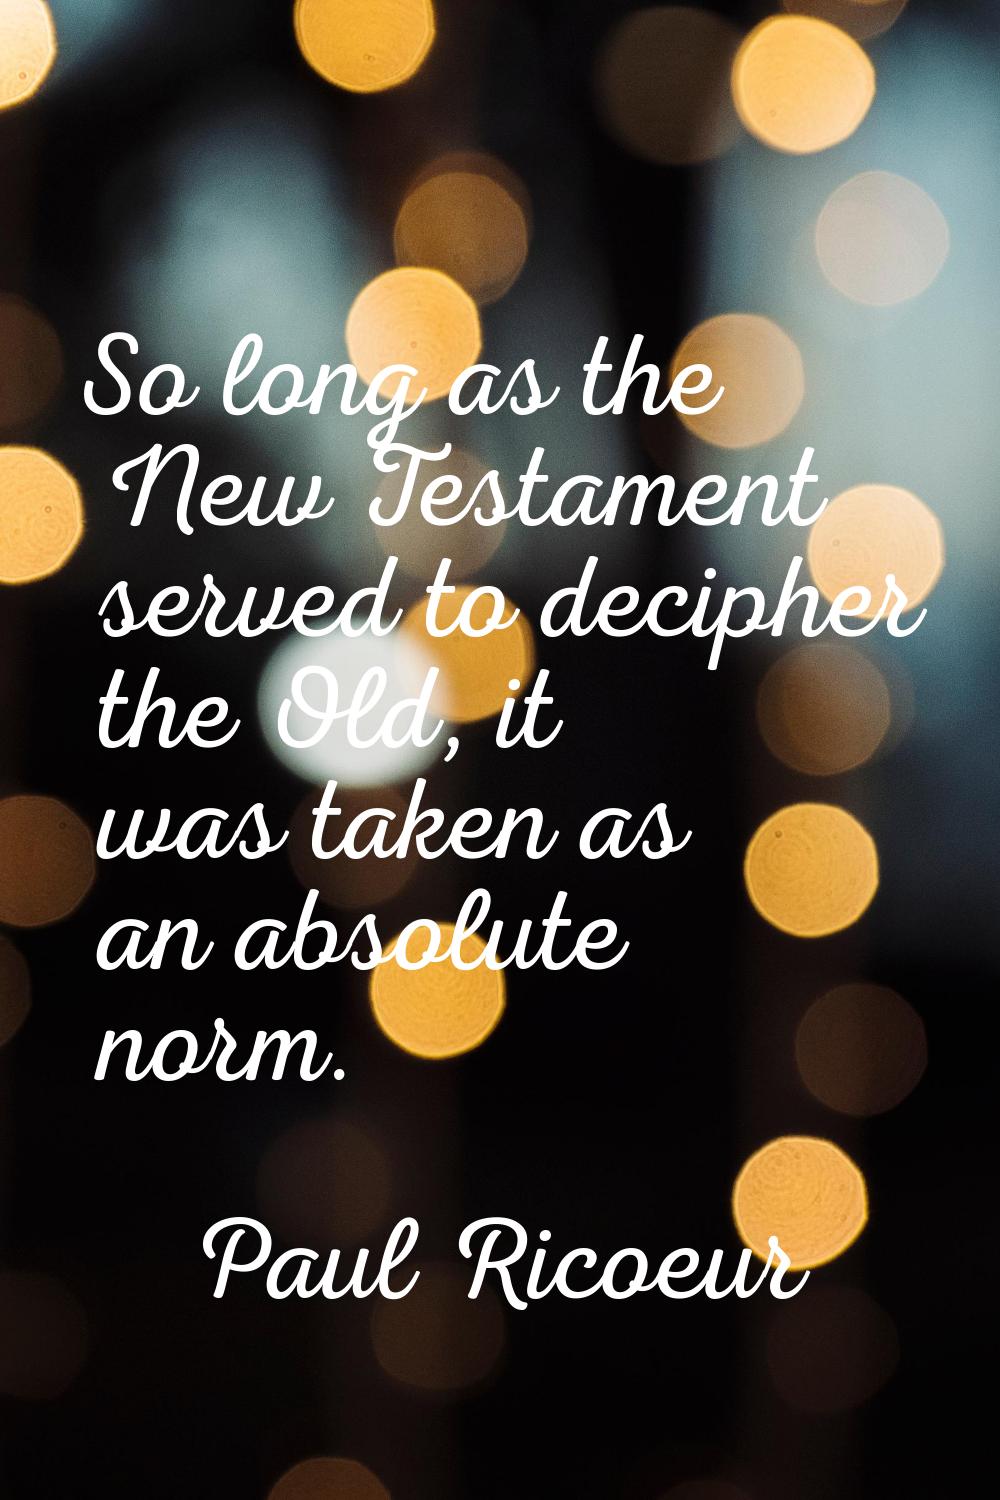 So long as the New Testament served to decipher the Old, it was taken as an absolute norm.